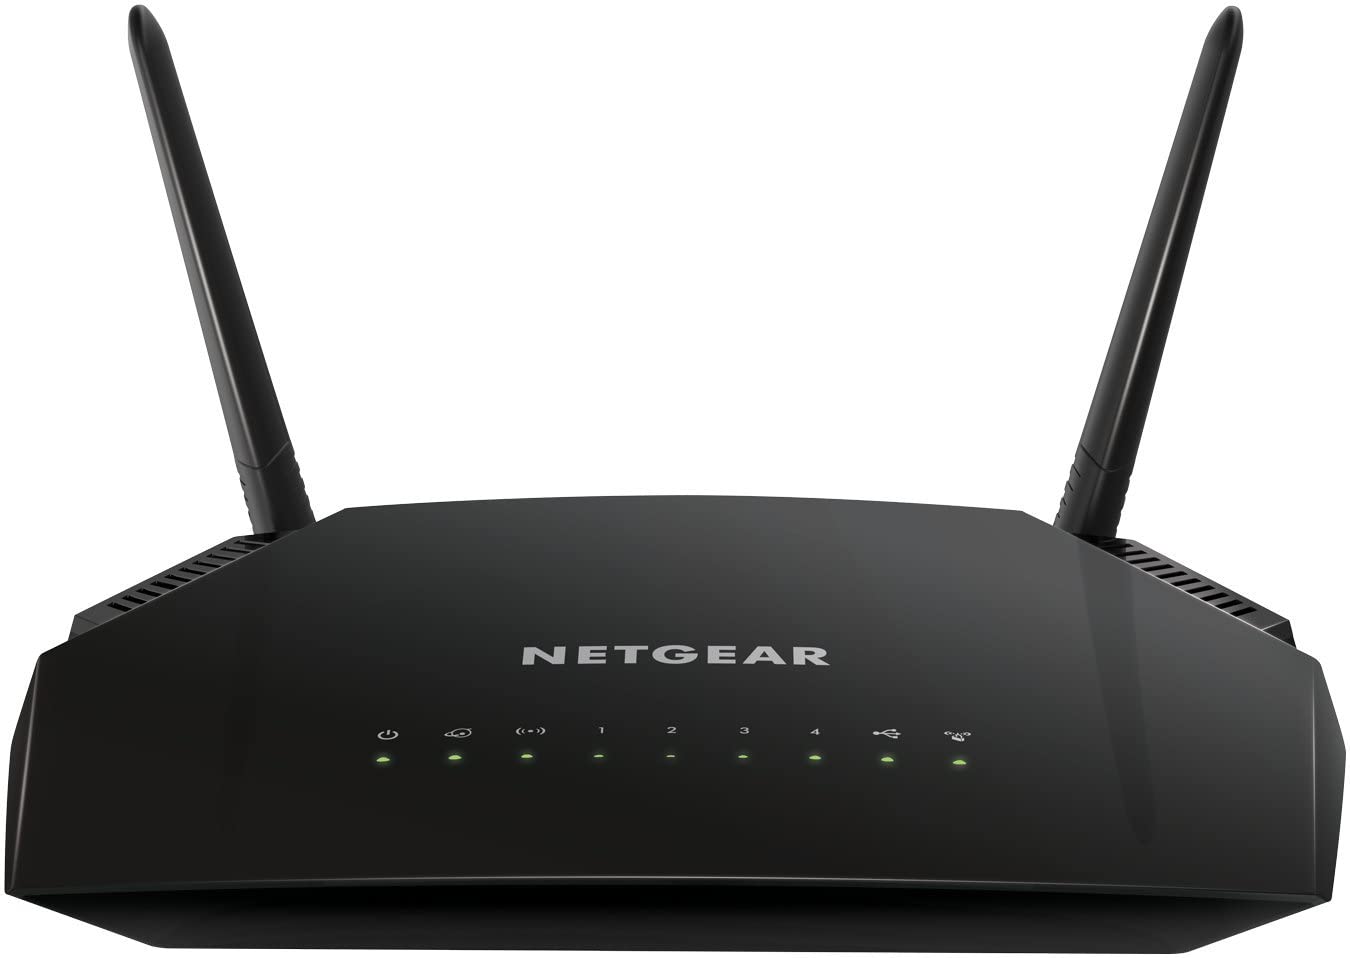 NETGEAR WiFi Router (R6230) - AC1200 Dual Band Wireless Speed (up to 1200 Mbps)